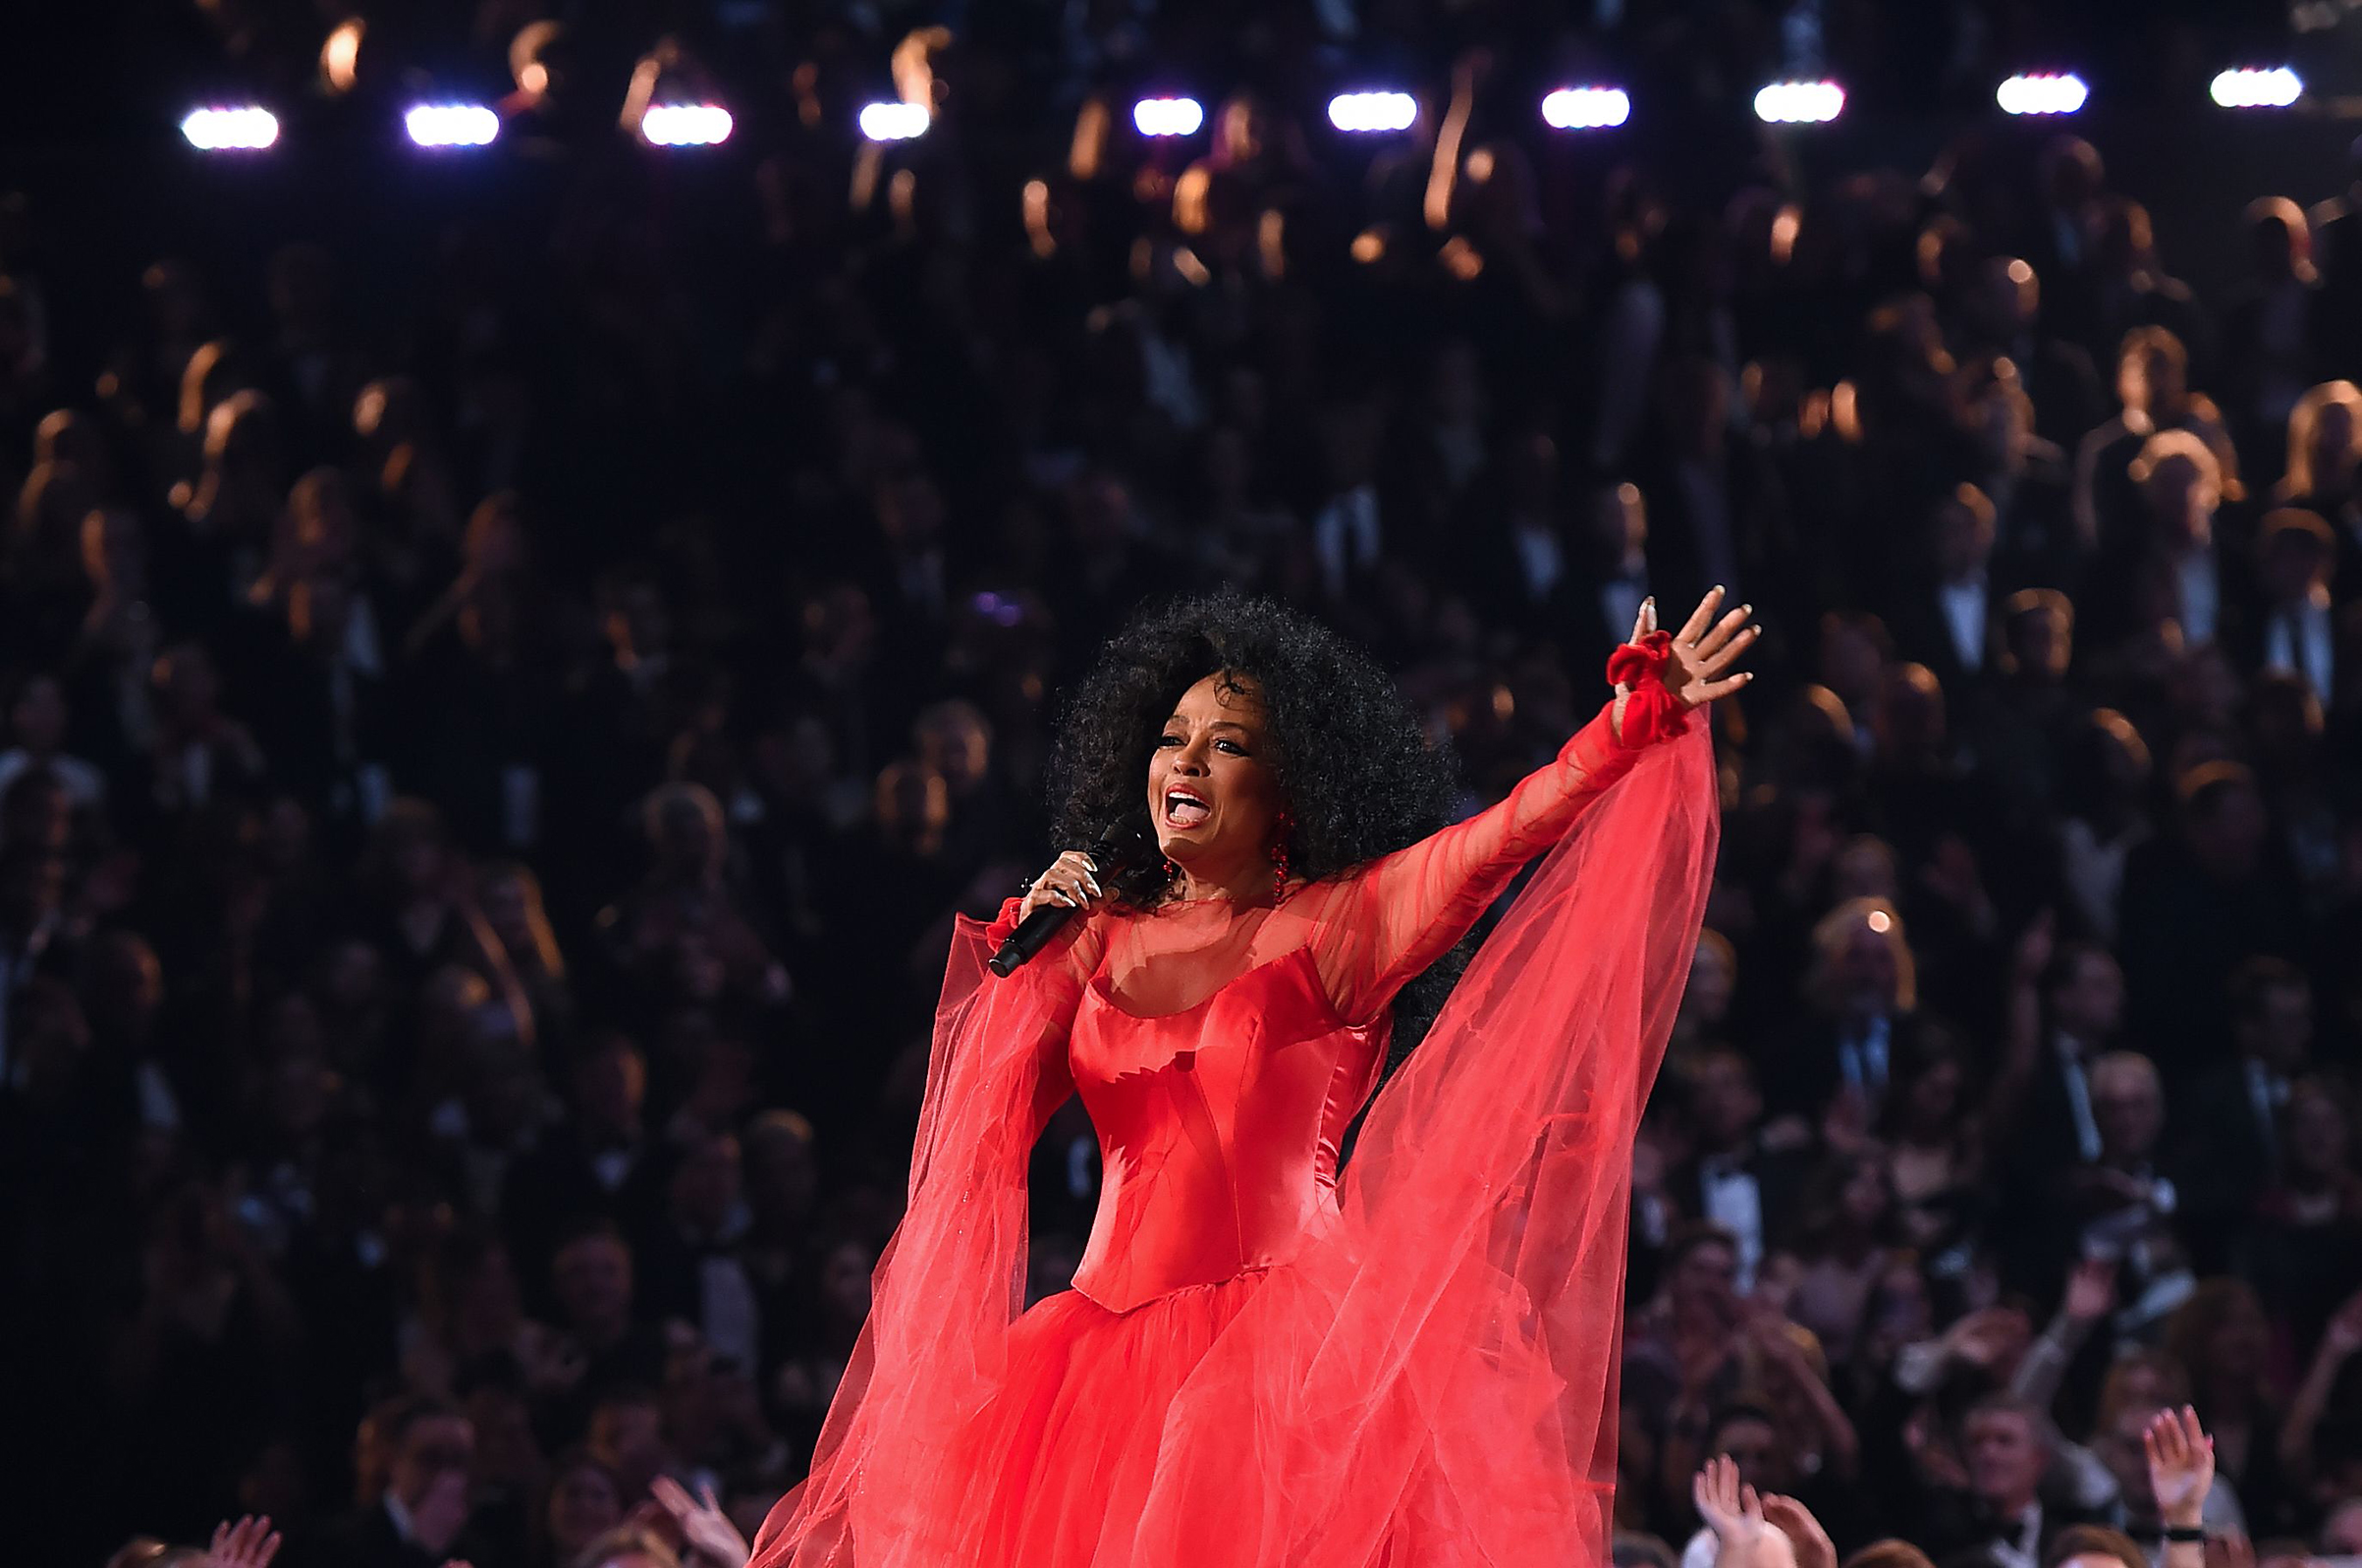 Diana Ross performs onstage during the 61st Annual Grammy Awards on Feb. 10, 2019, in Los Angeles. (Robyn Beck—AFP/Getty Images)